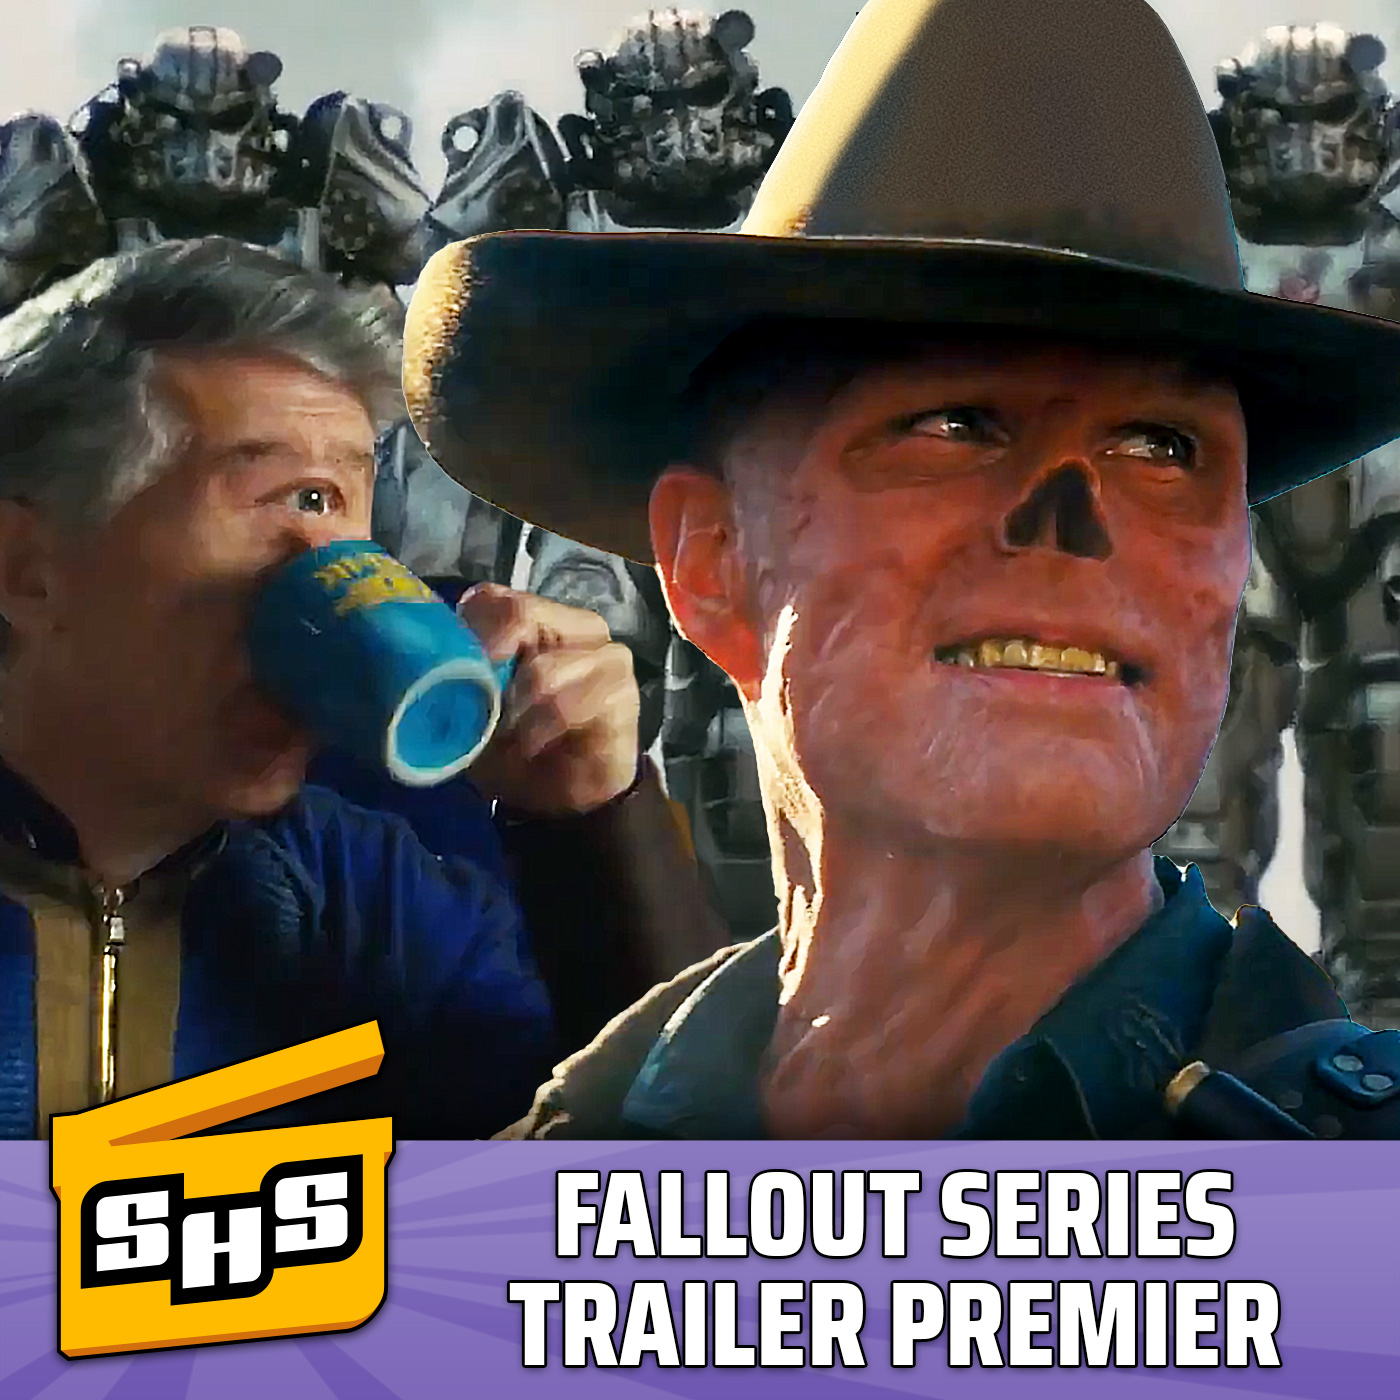 Fallout, Godzilla x Kong, Furiosa, The Boys, Halo, and Game of Thrones Trailers!